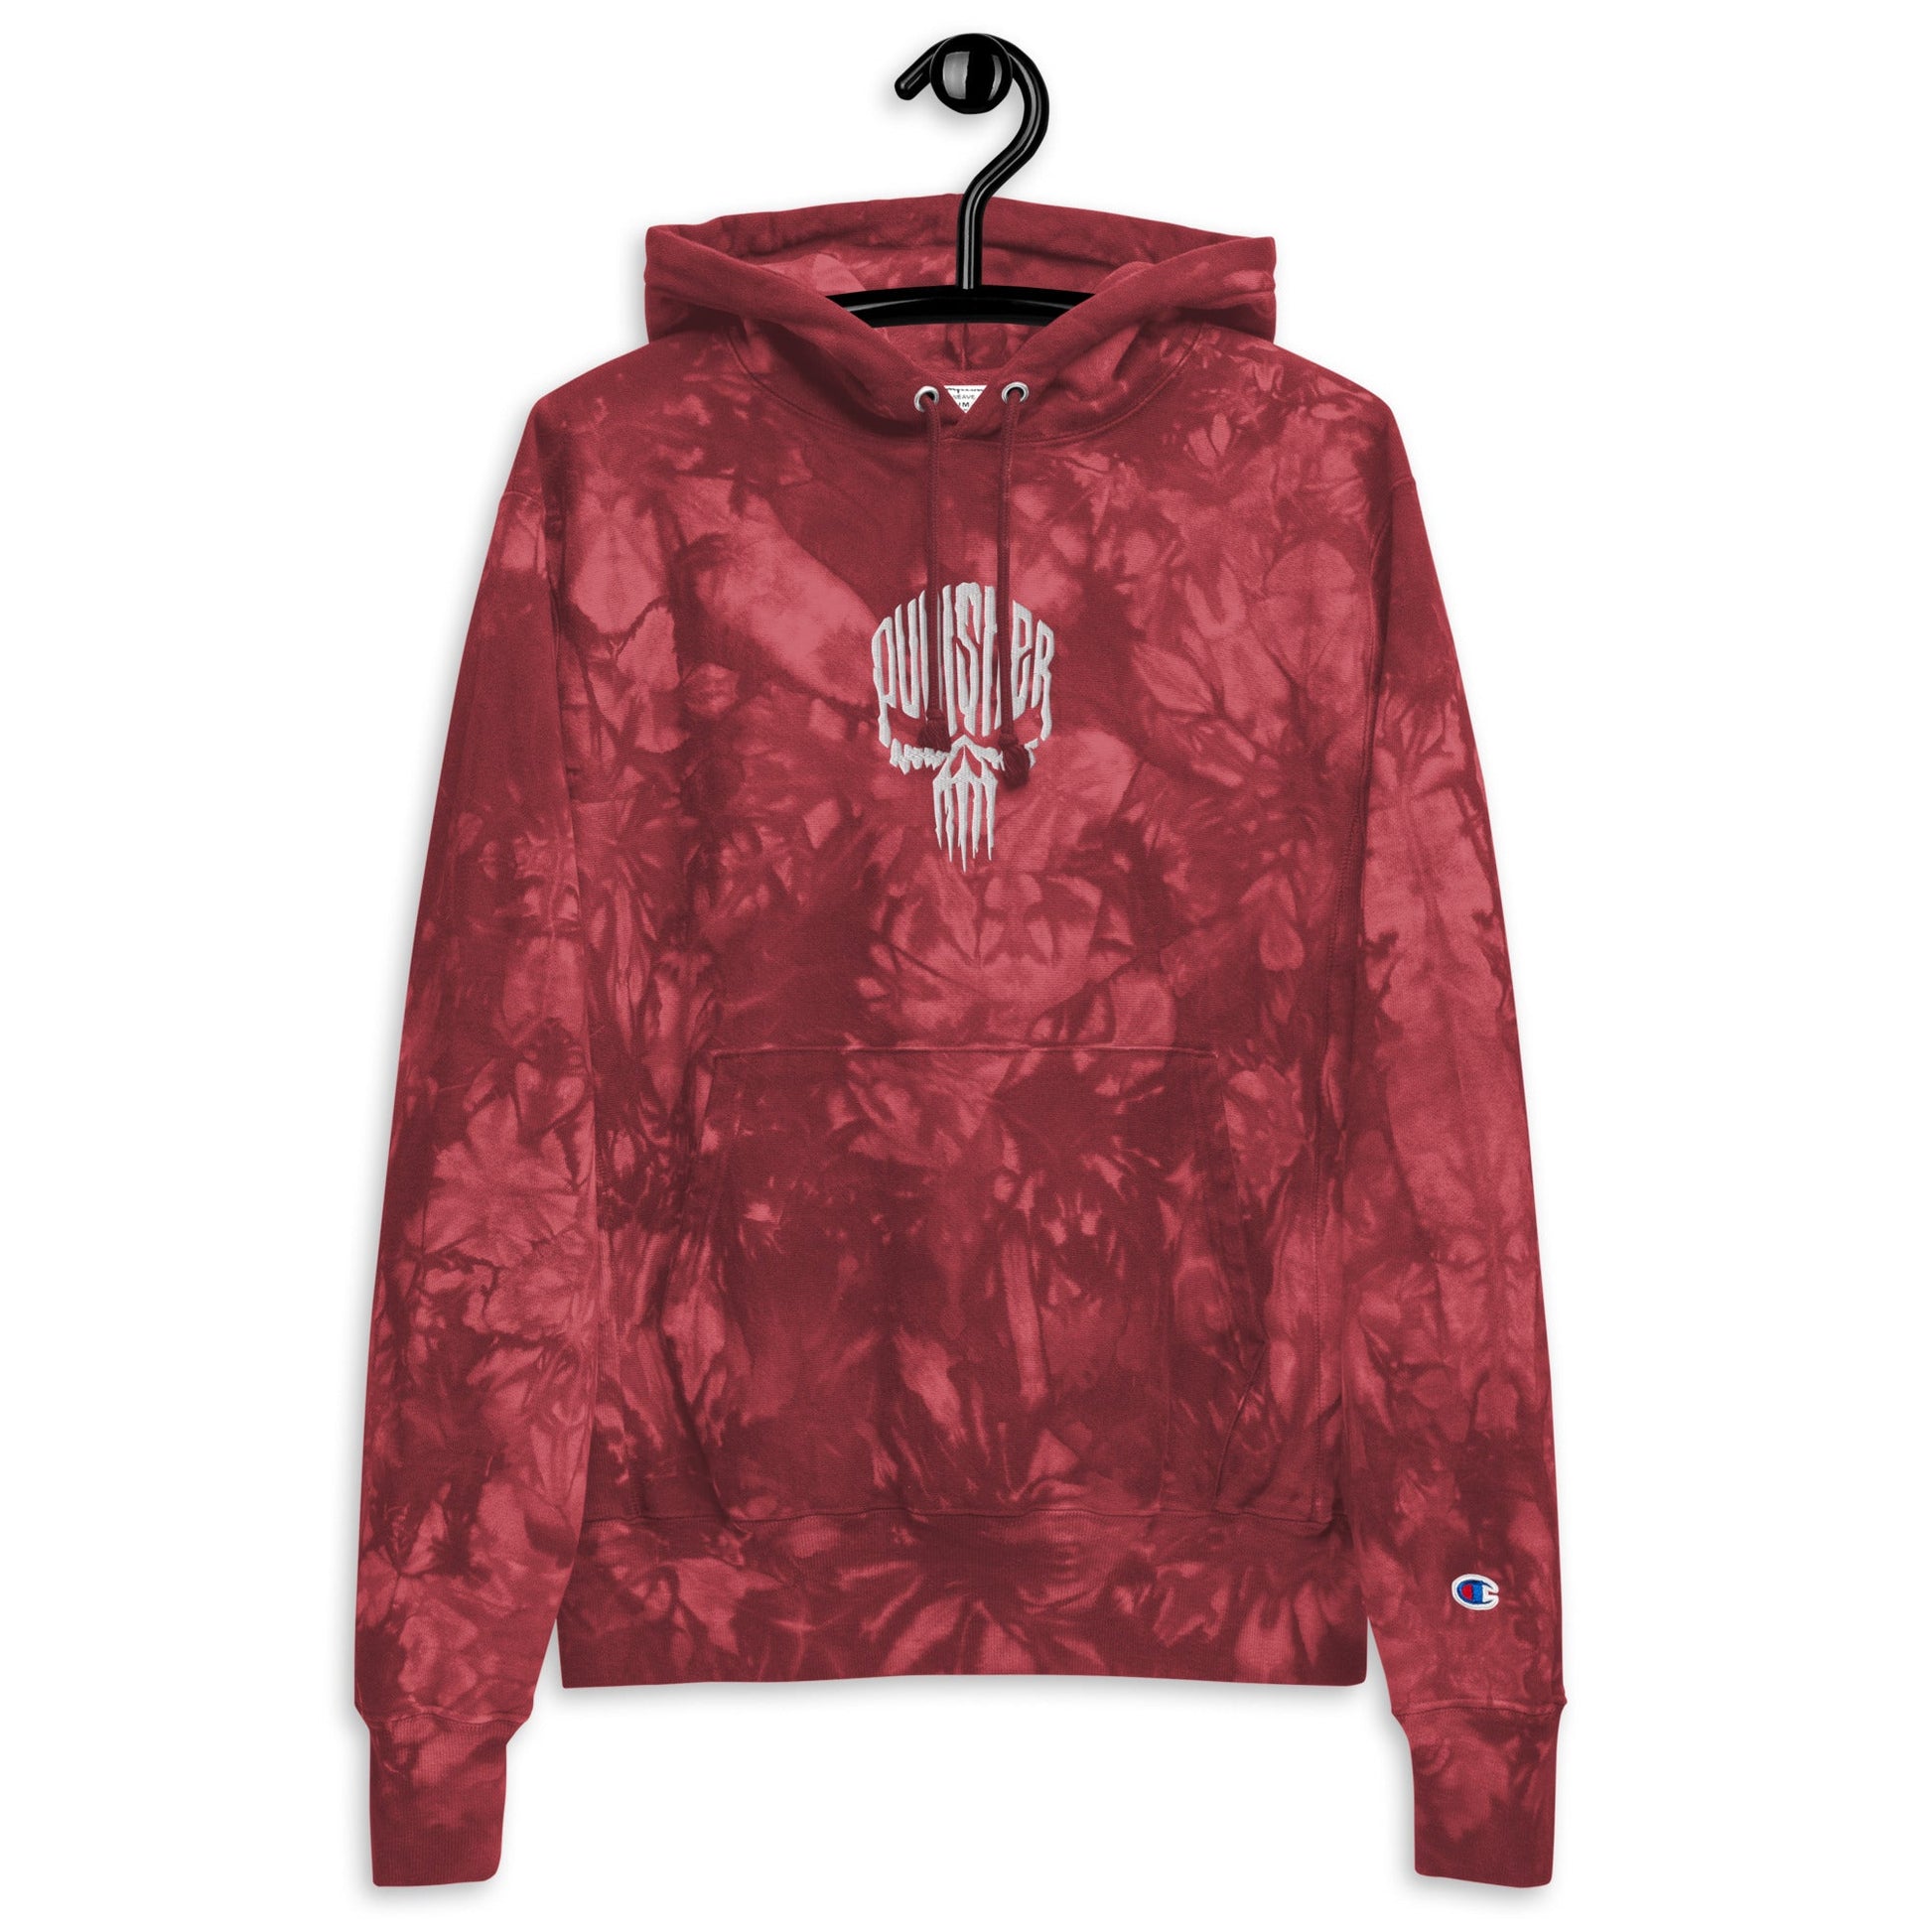 mens-champion-tie-dye-hoodie-punisher-mulled-berry